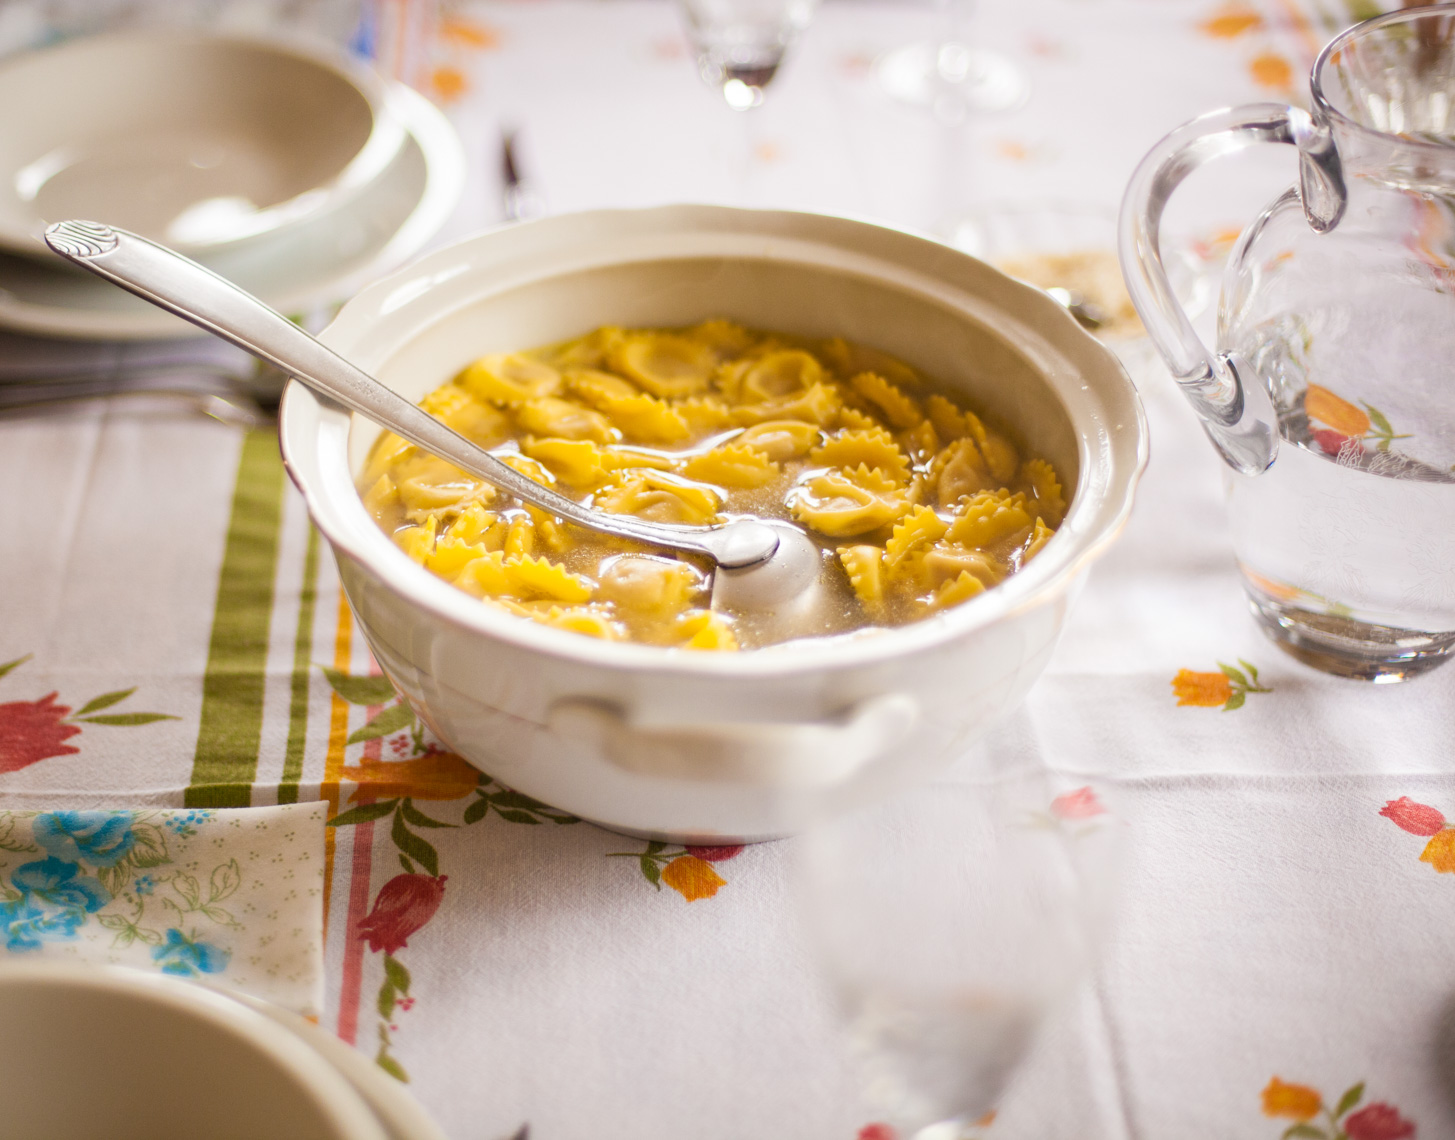 Homemade pasta on tablecloth | Visual Storytelling Photographer